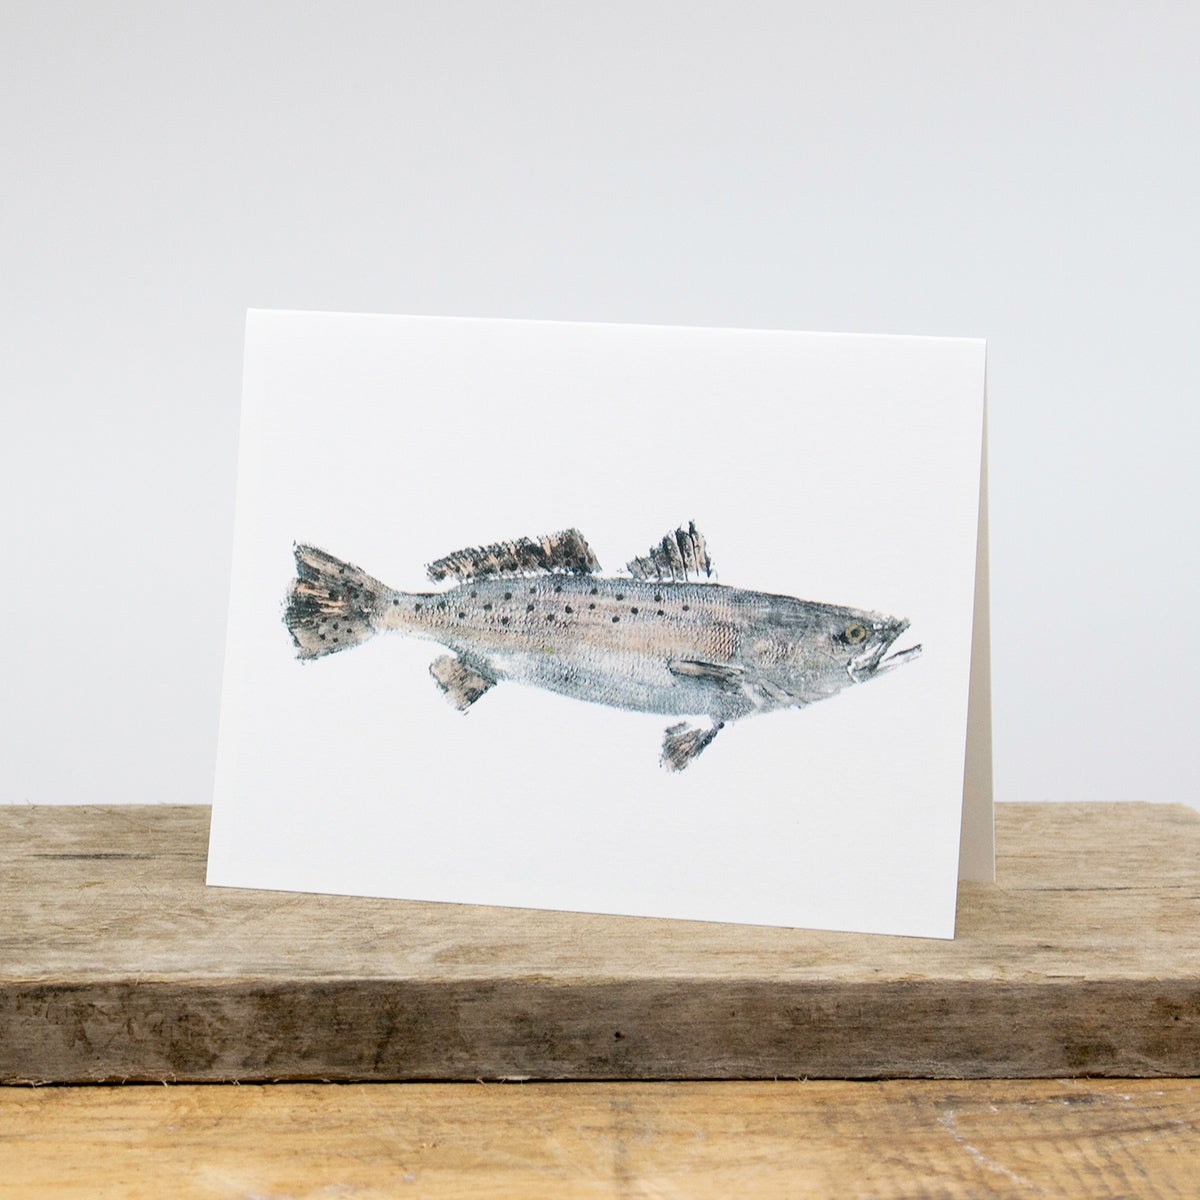 Spotted Sea Trout